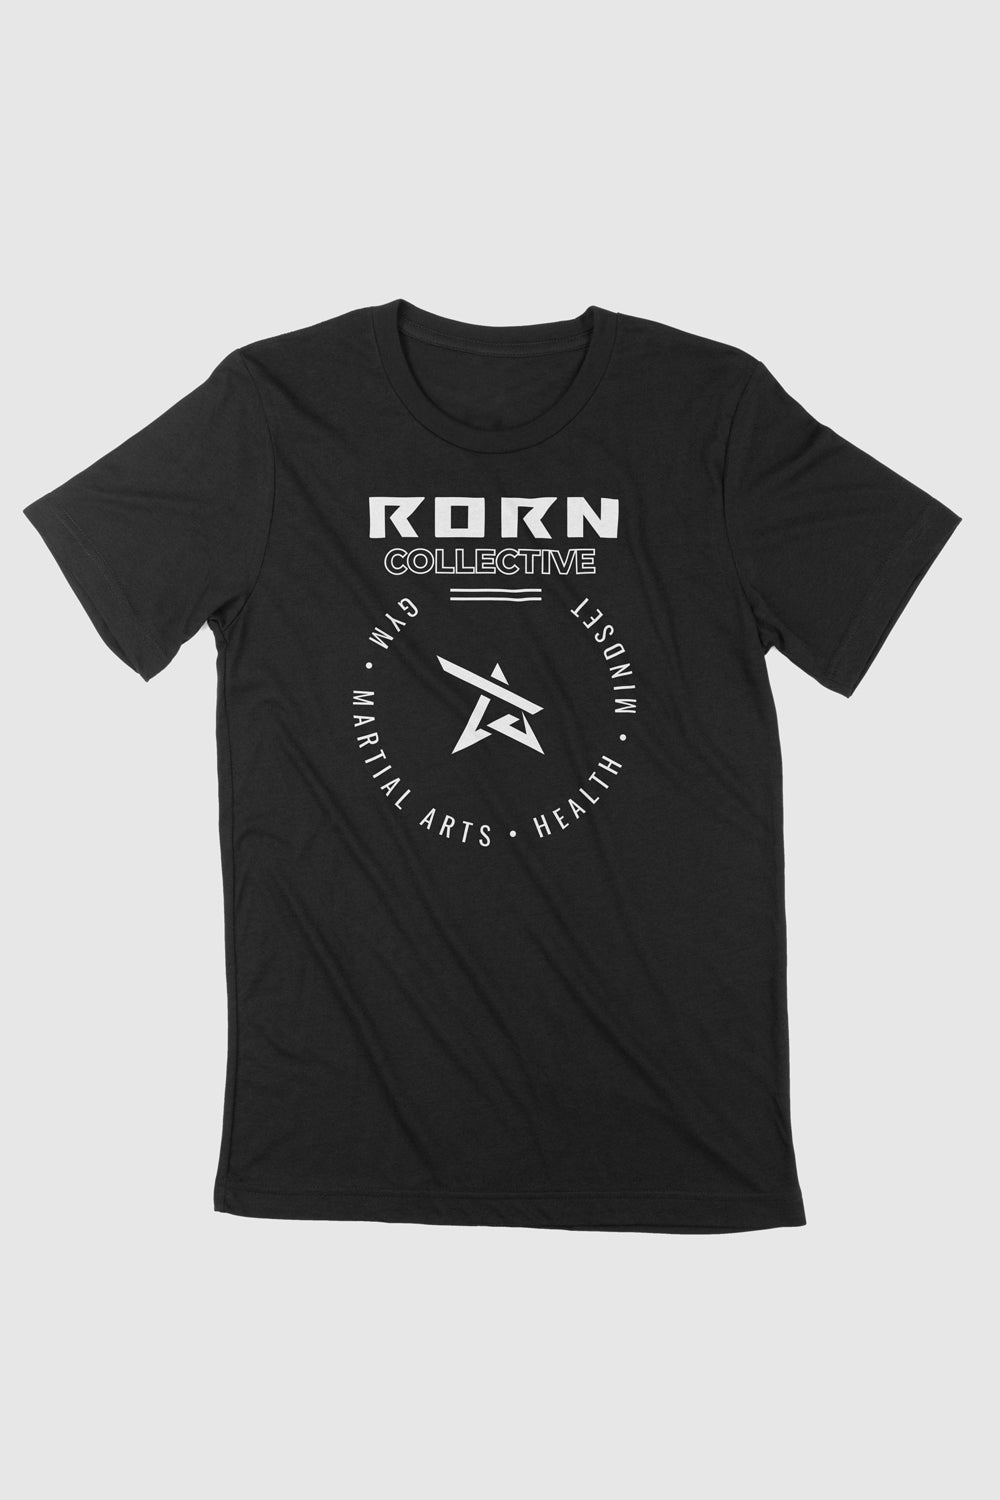 RORN Collective Gym - Tank